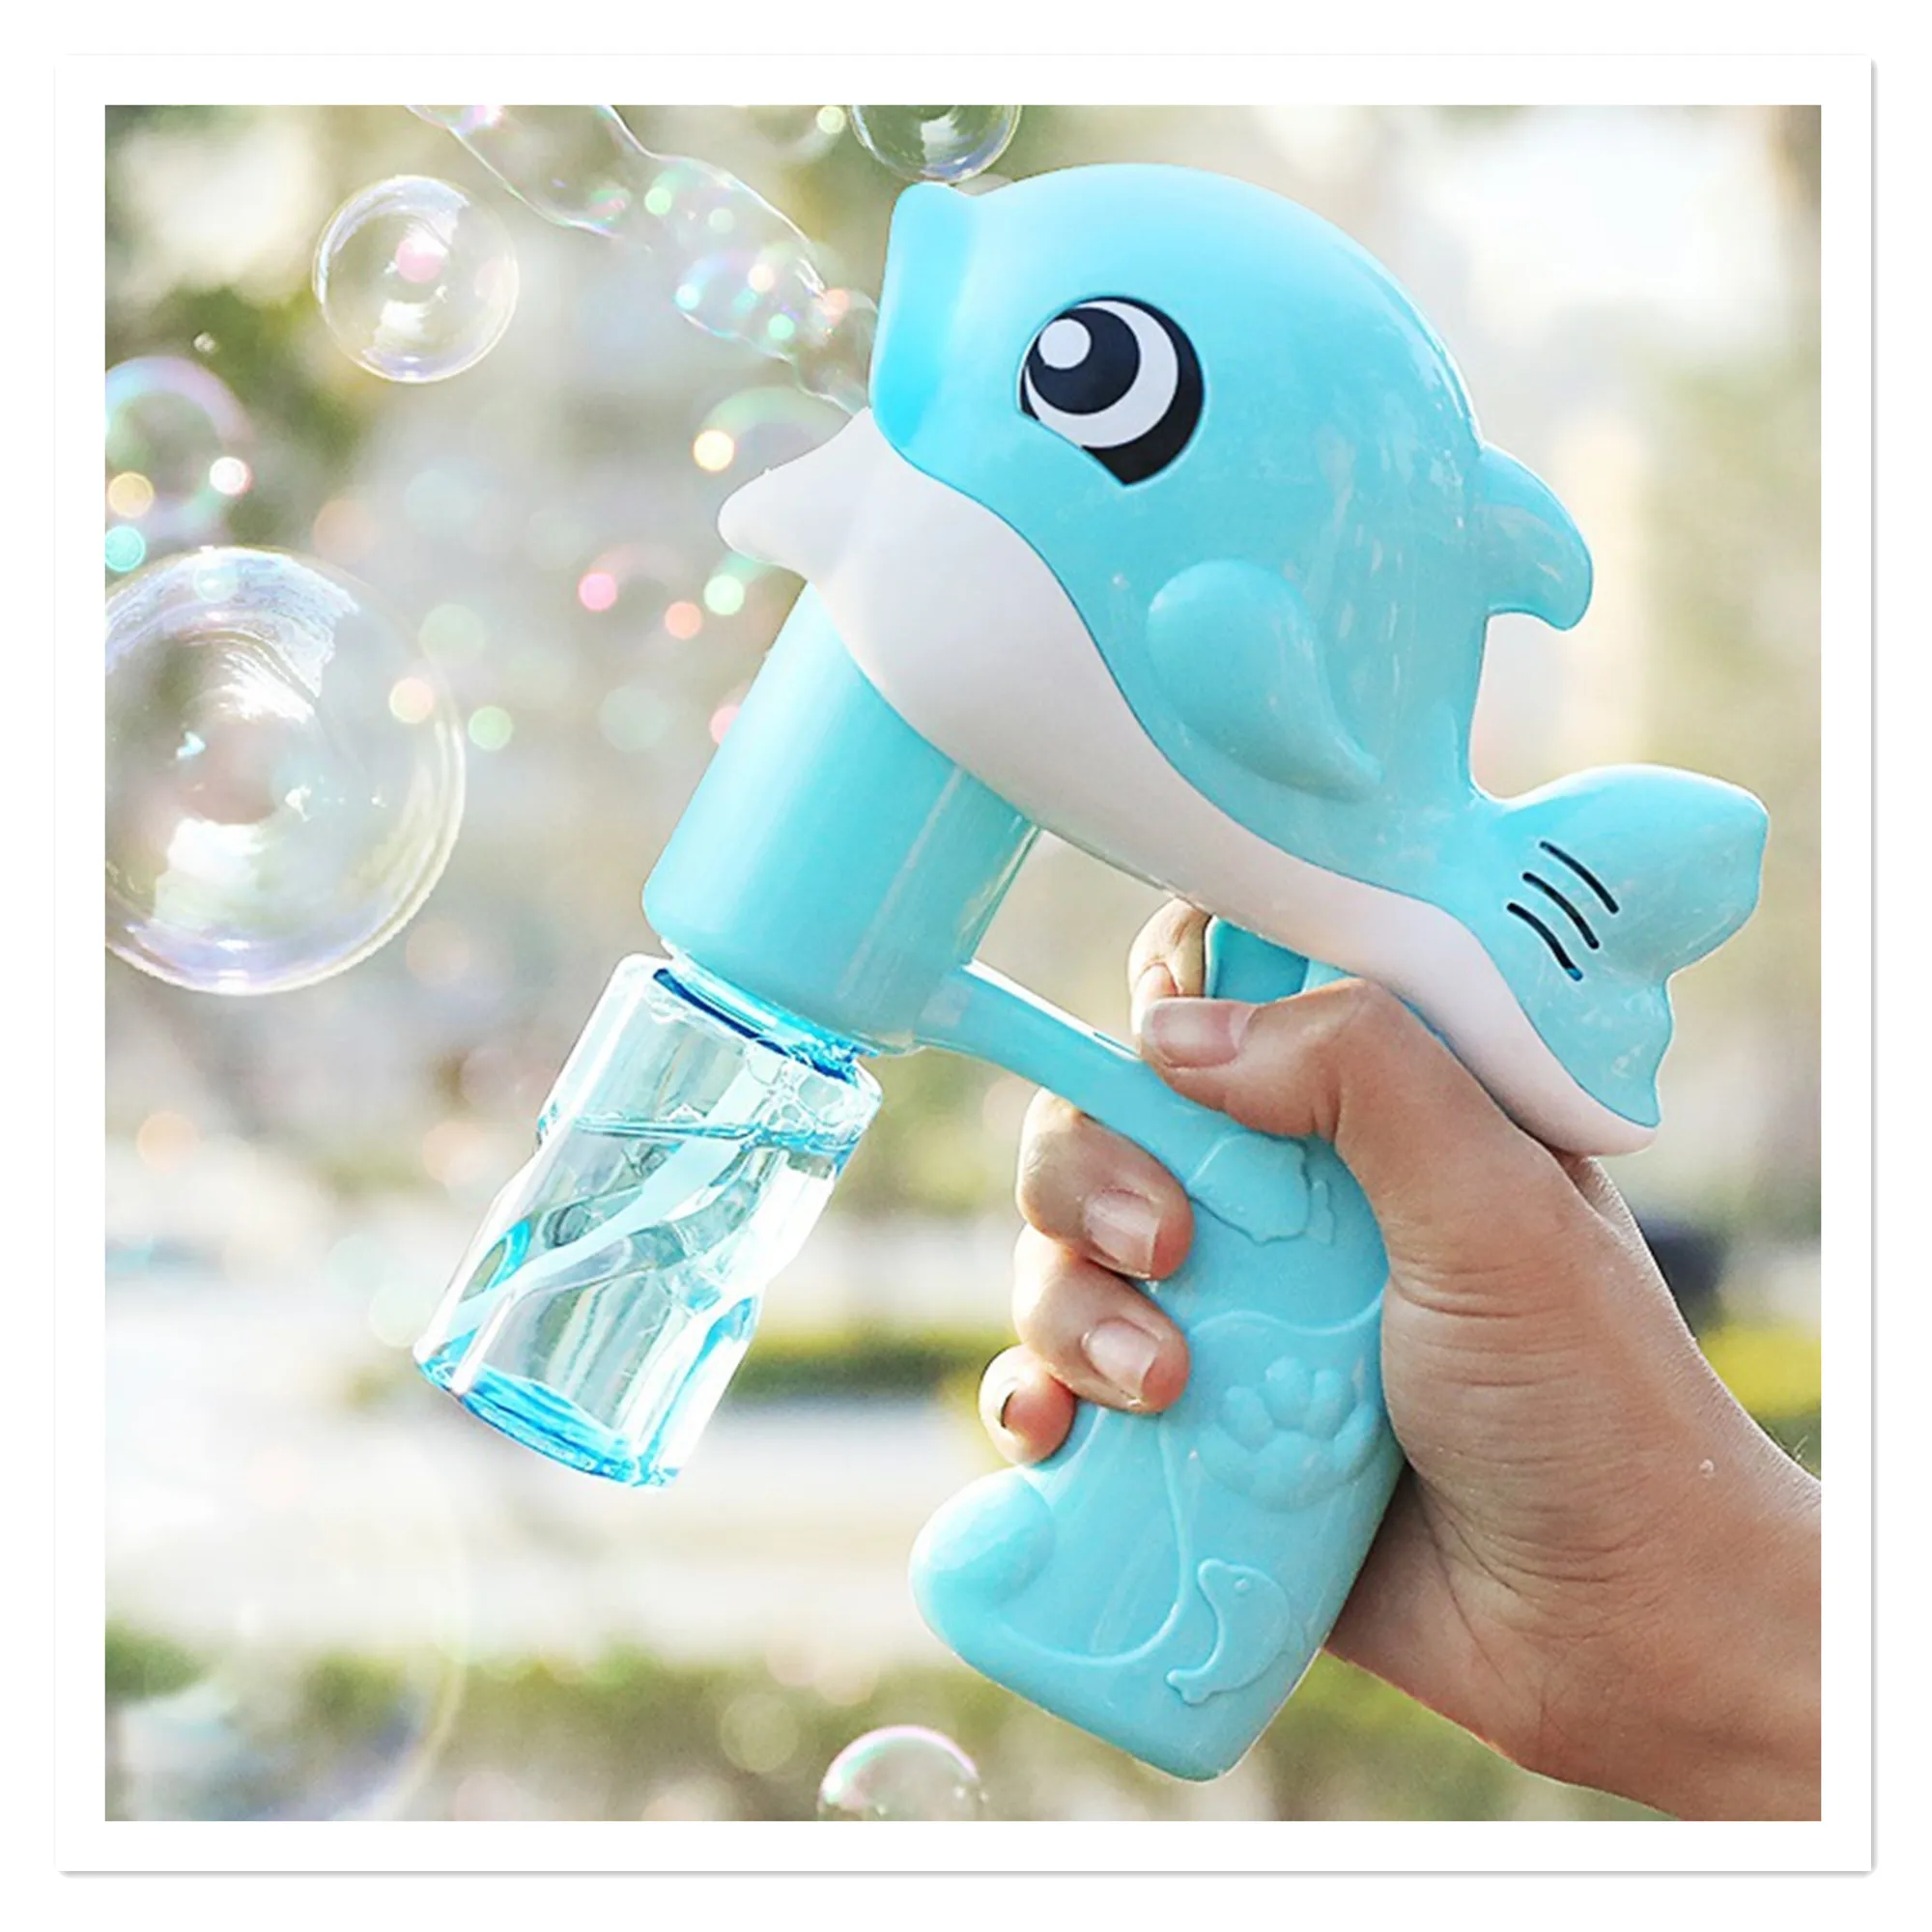 

Wholesale of liquid-free bubble machine at night market stalls Flash toy children outdoor electric full-automatic dolphin bubble